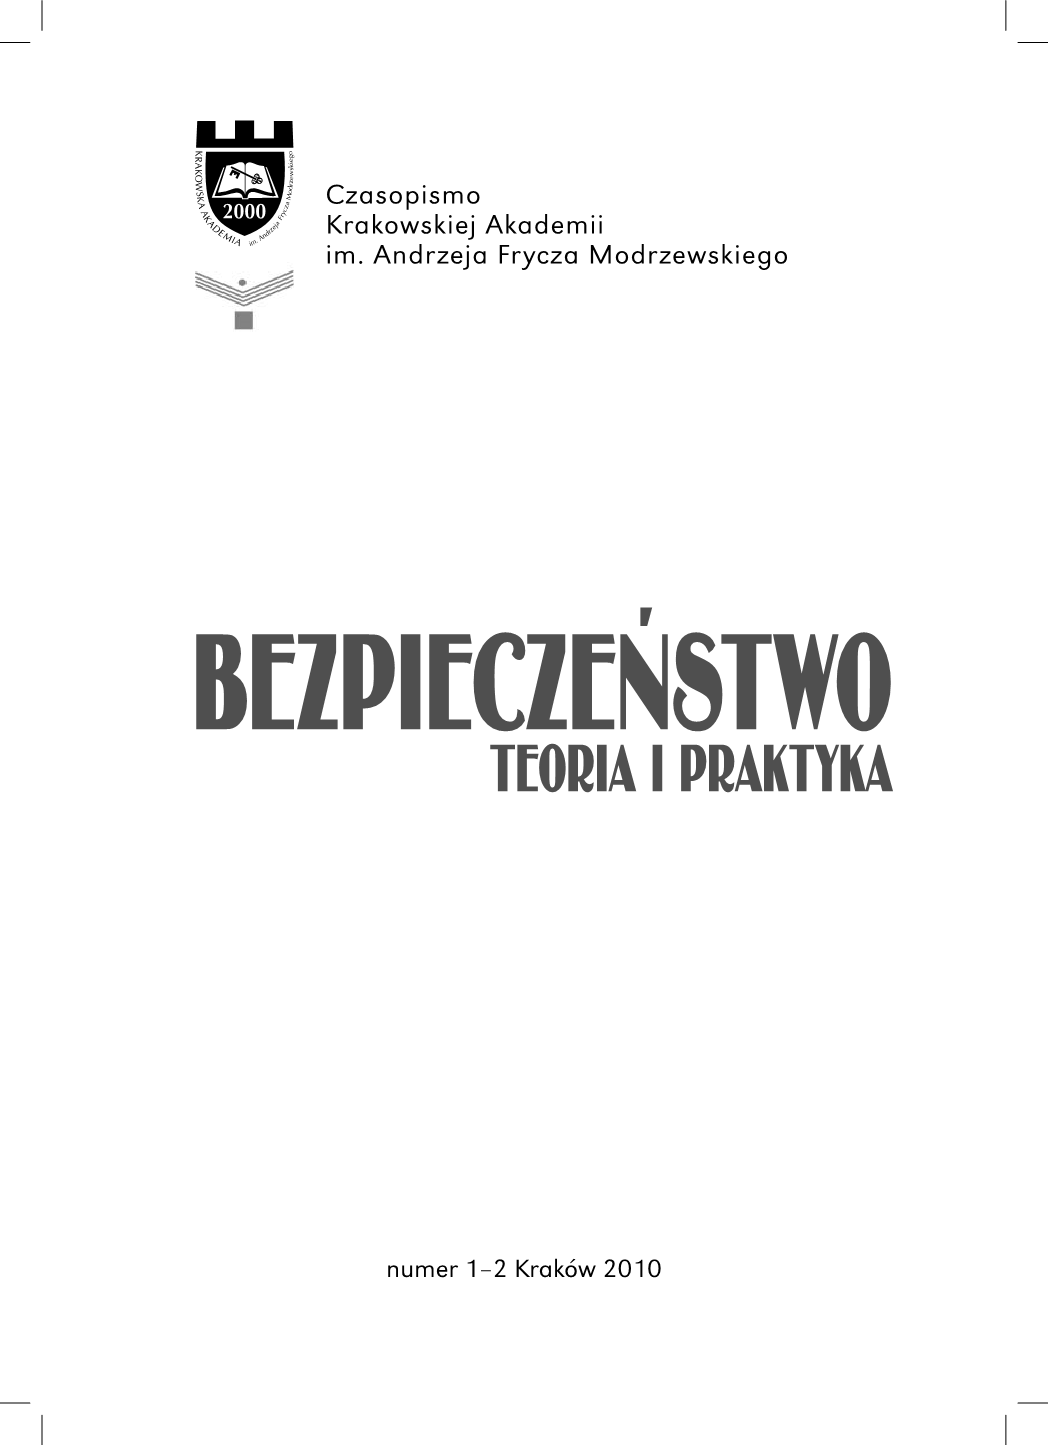 The organisation and overview of the work of the Team 1 (Inspirational) of the IIb Section of the II Department of the Main General Headquarters of the Polish Army. Cover Image